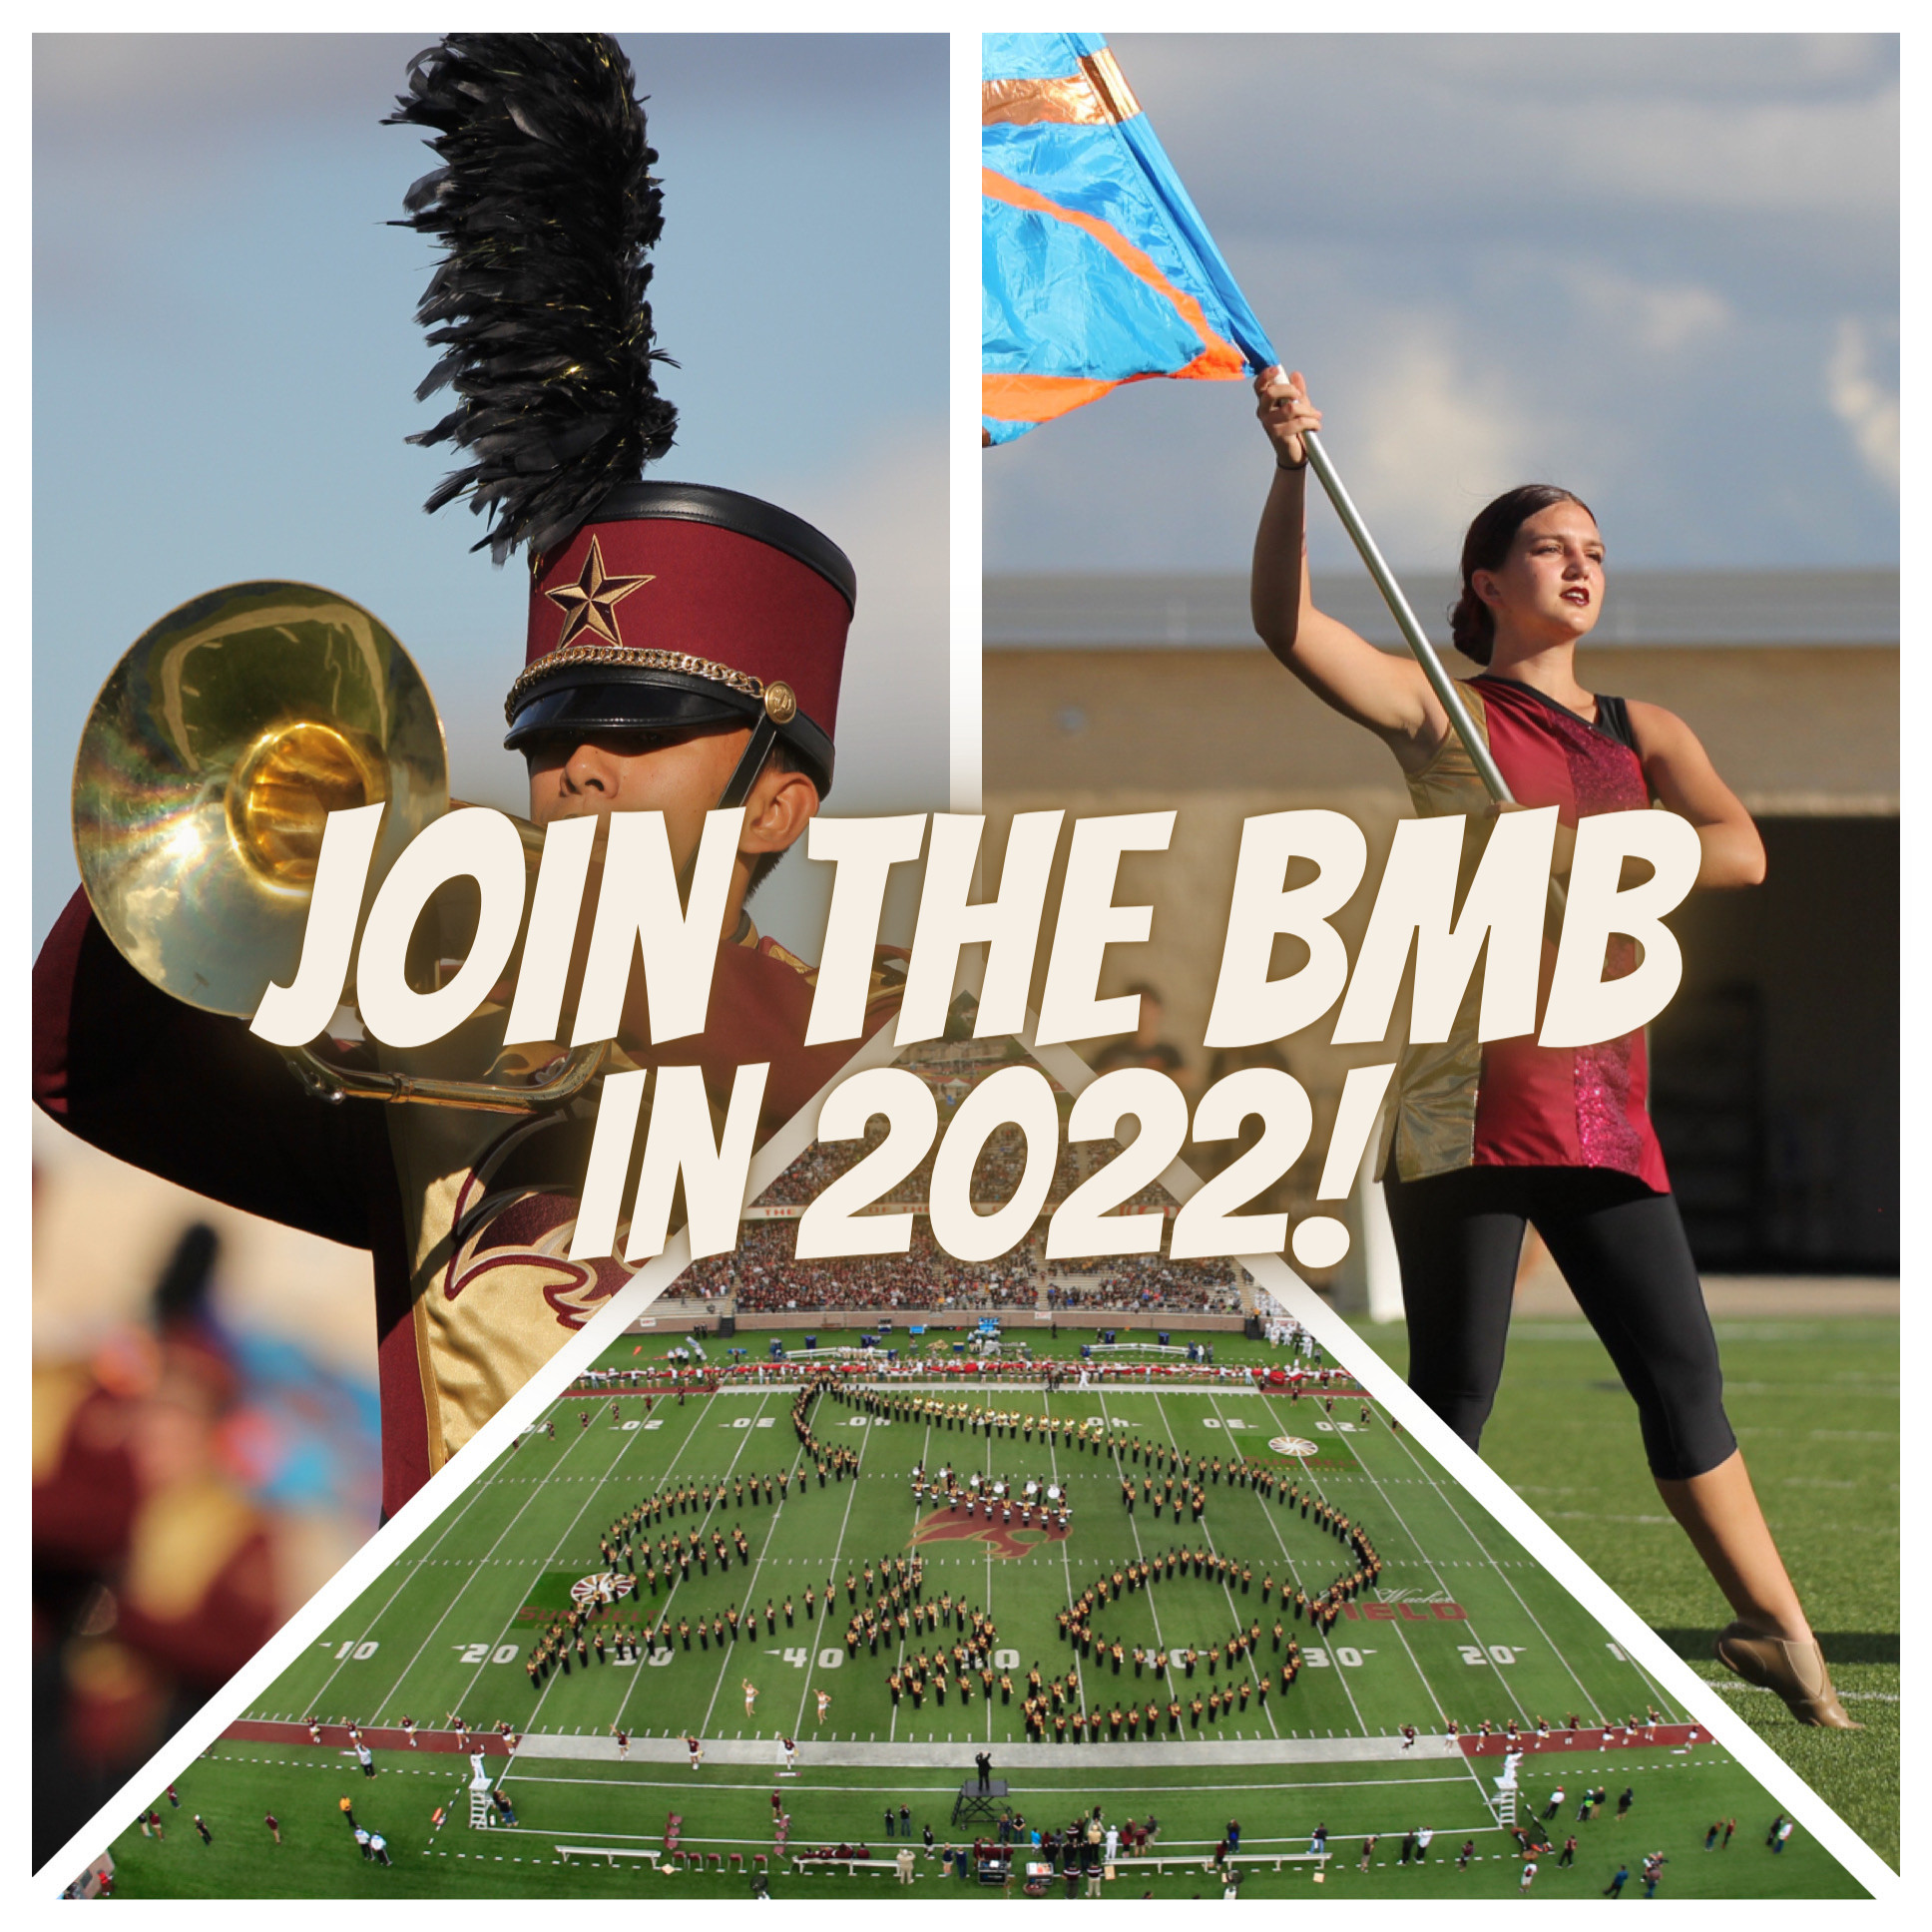 Collage of mellophone player, guard member with flag, and marching band in formation on field